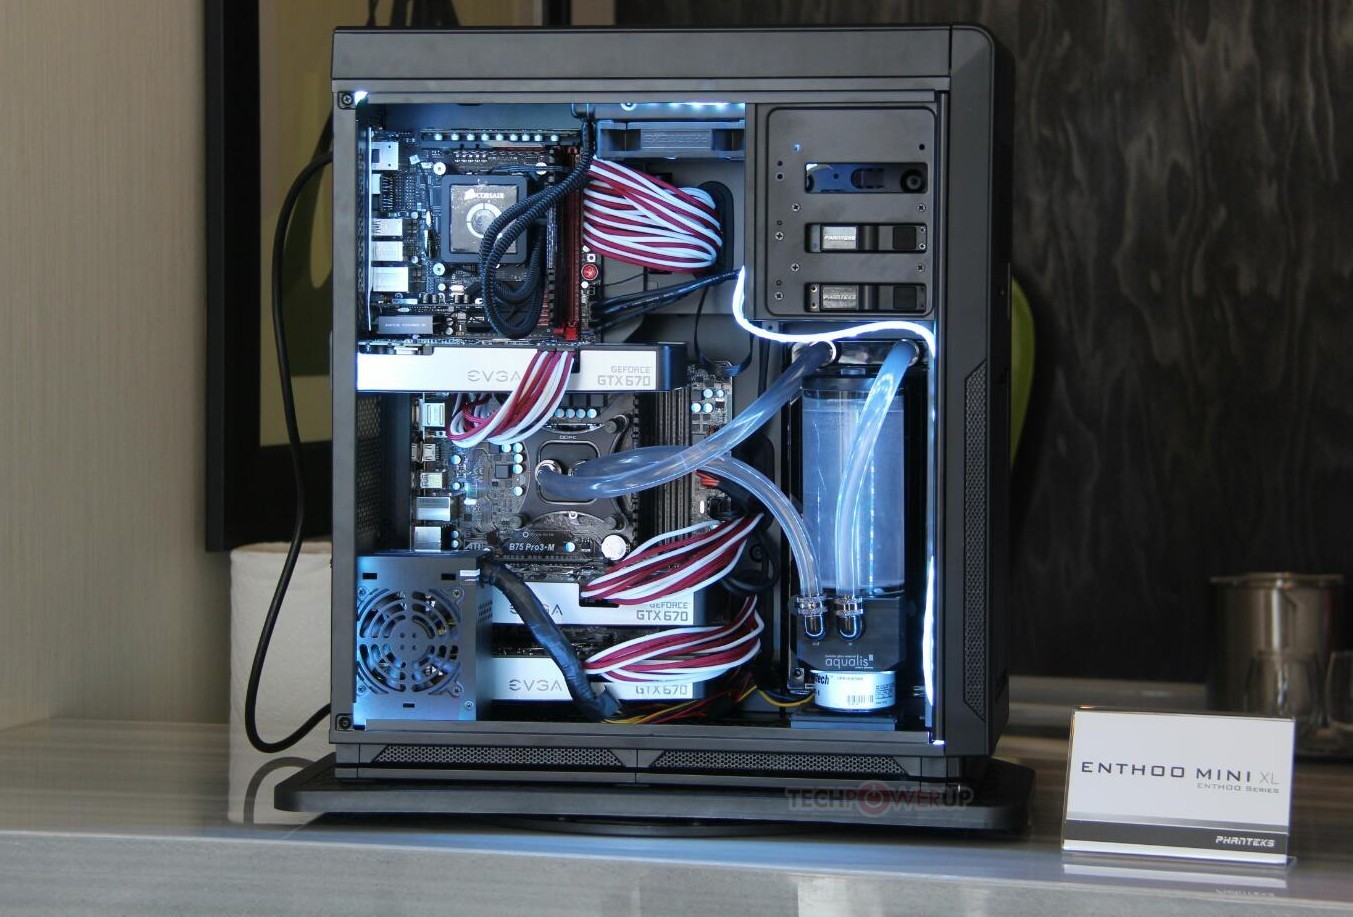 A-Case-That-Can-Hold-Two-Computers-the-Phanteks-Enthoo-Mini-XL-469714-2.jpg